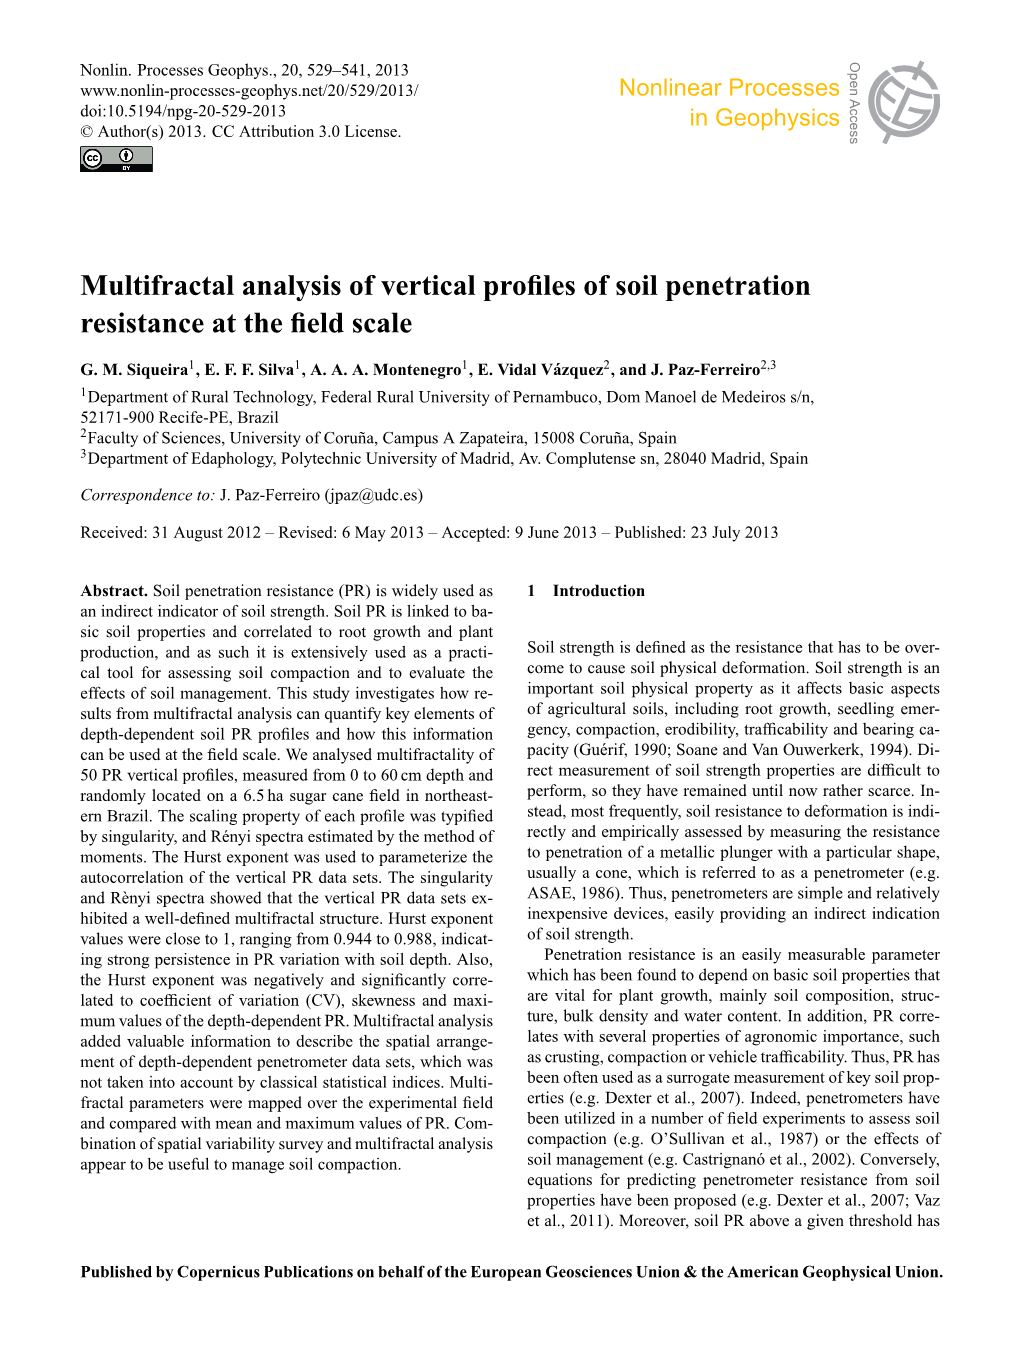 Multifractal Analysis of Vertical Profiles of Soil Penetration Resistance at The